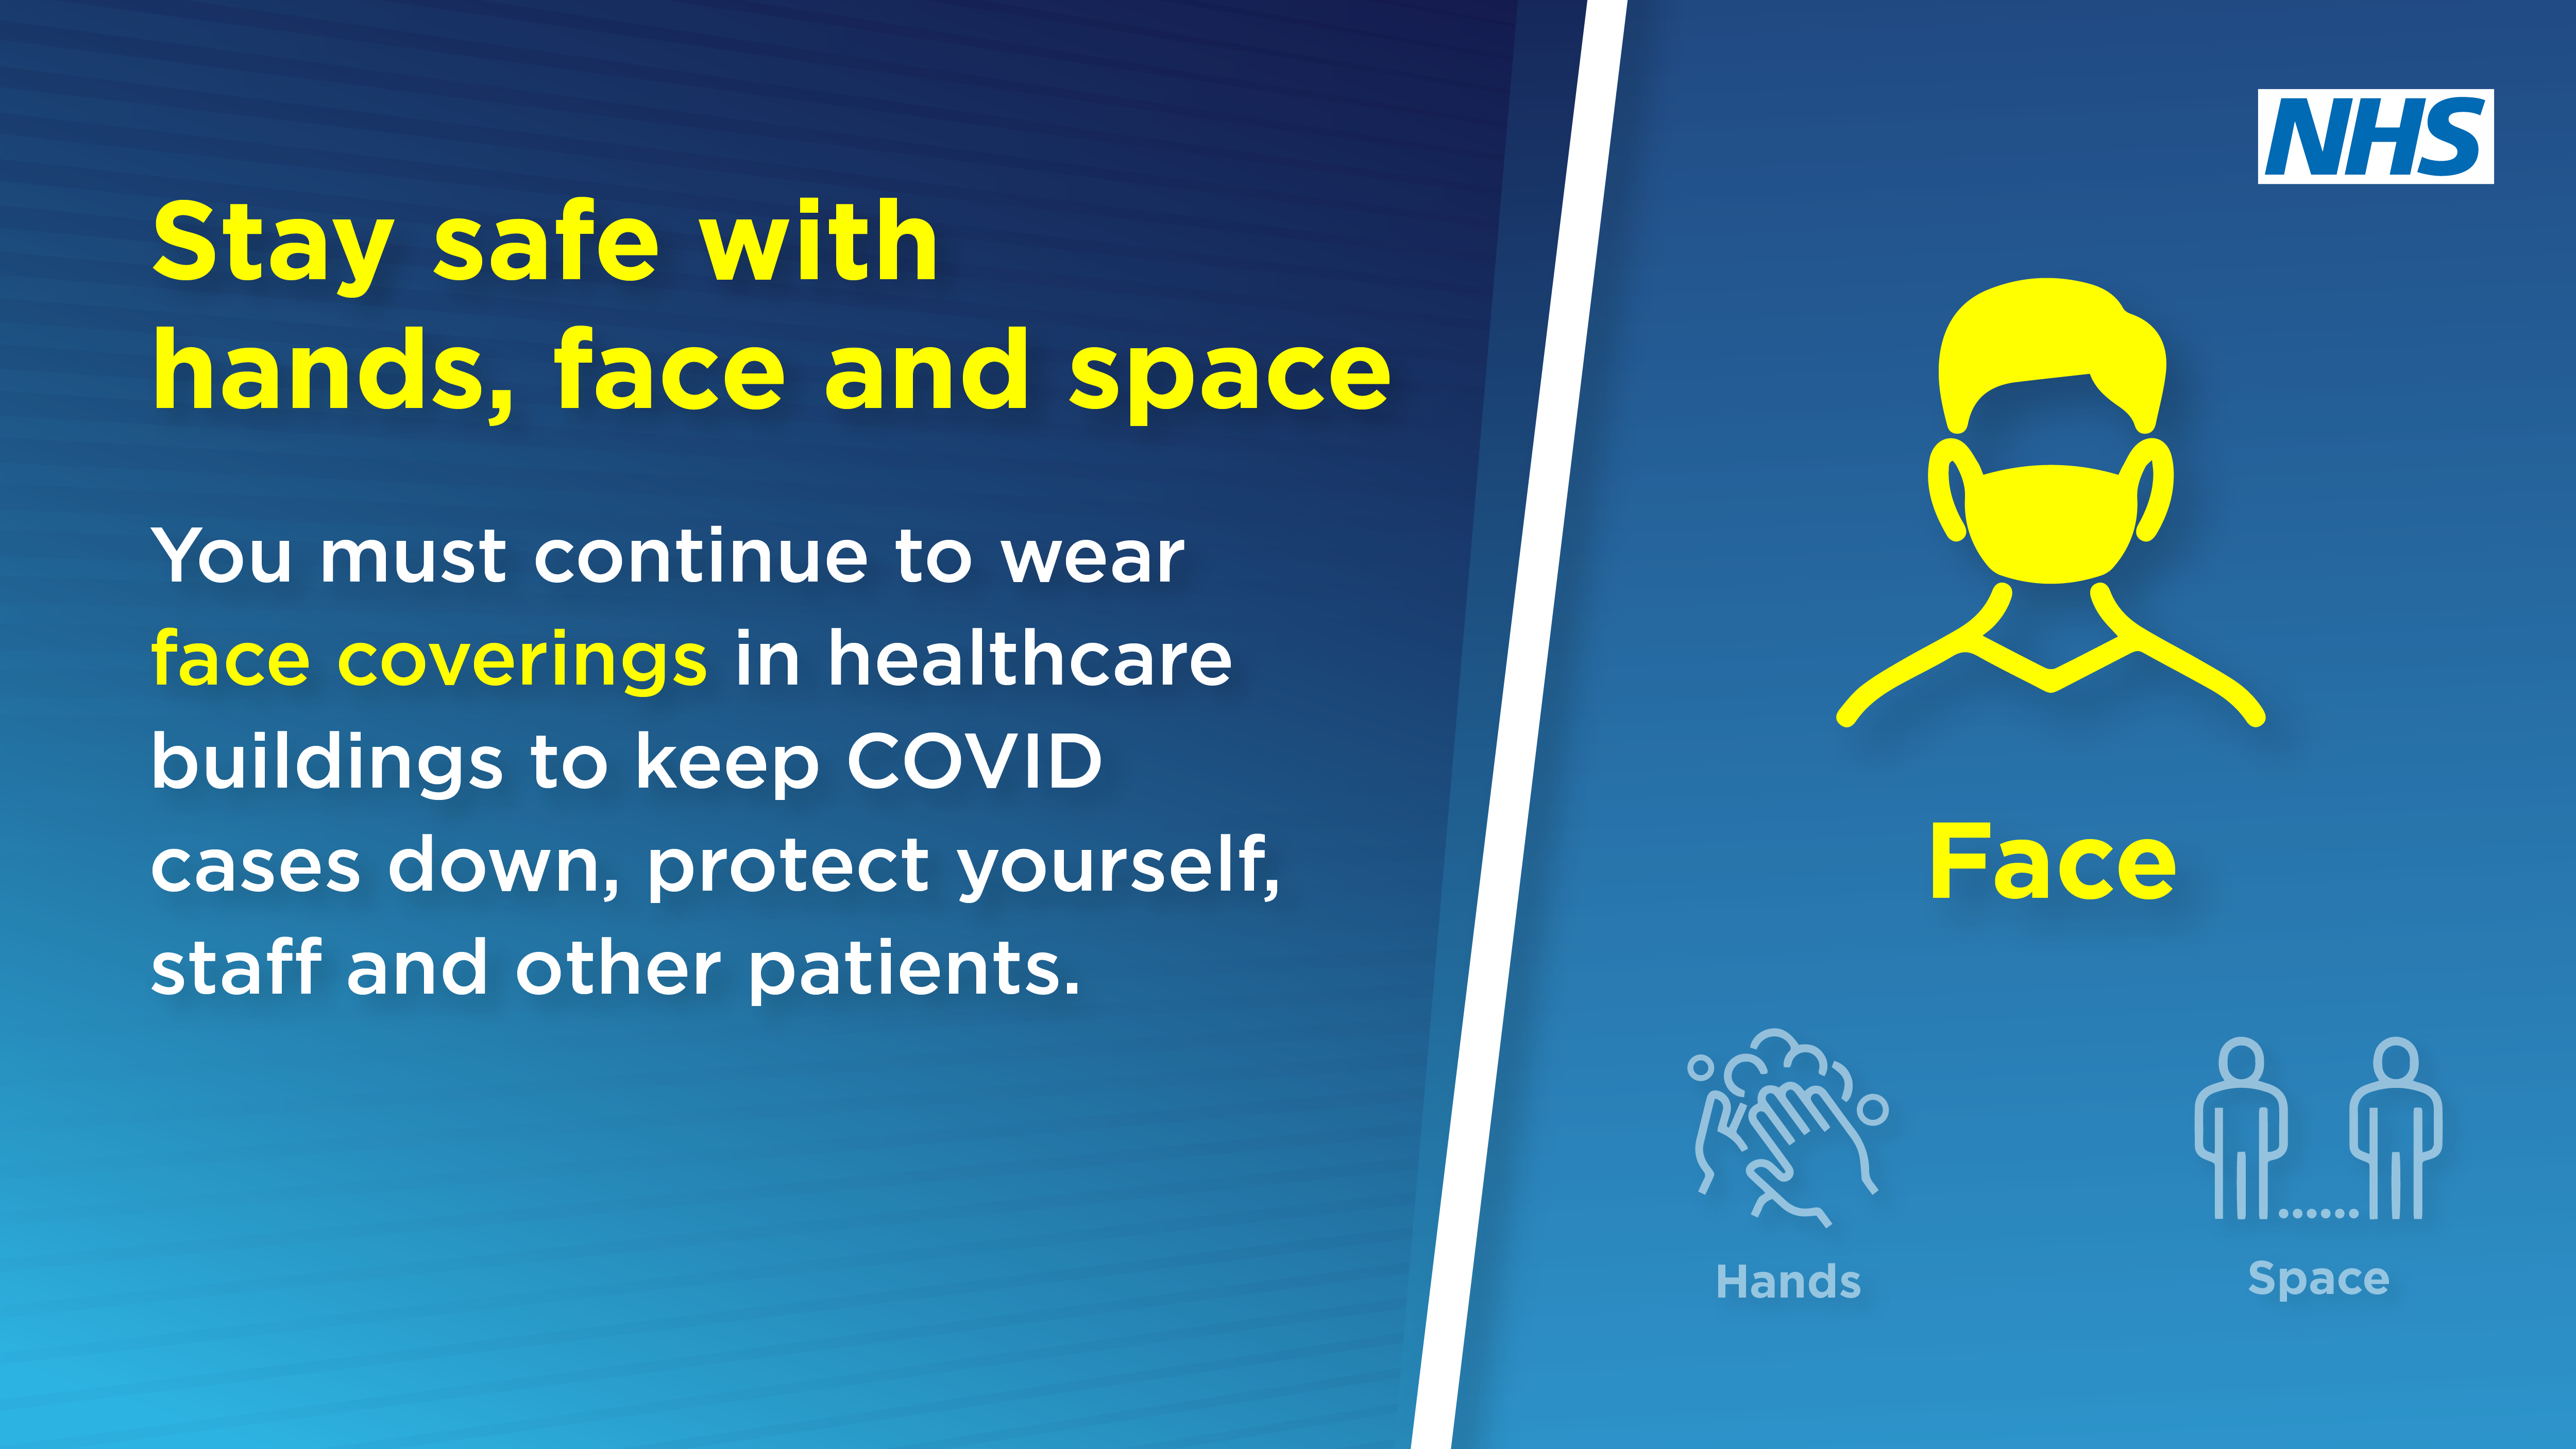 You must continue to wear face coverings in healthcare buildings